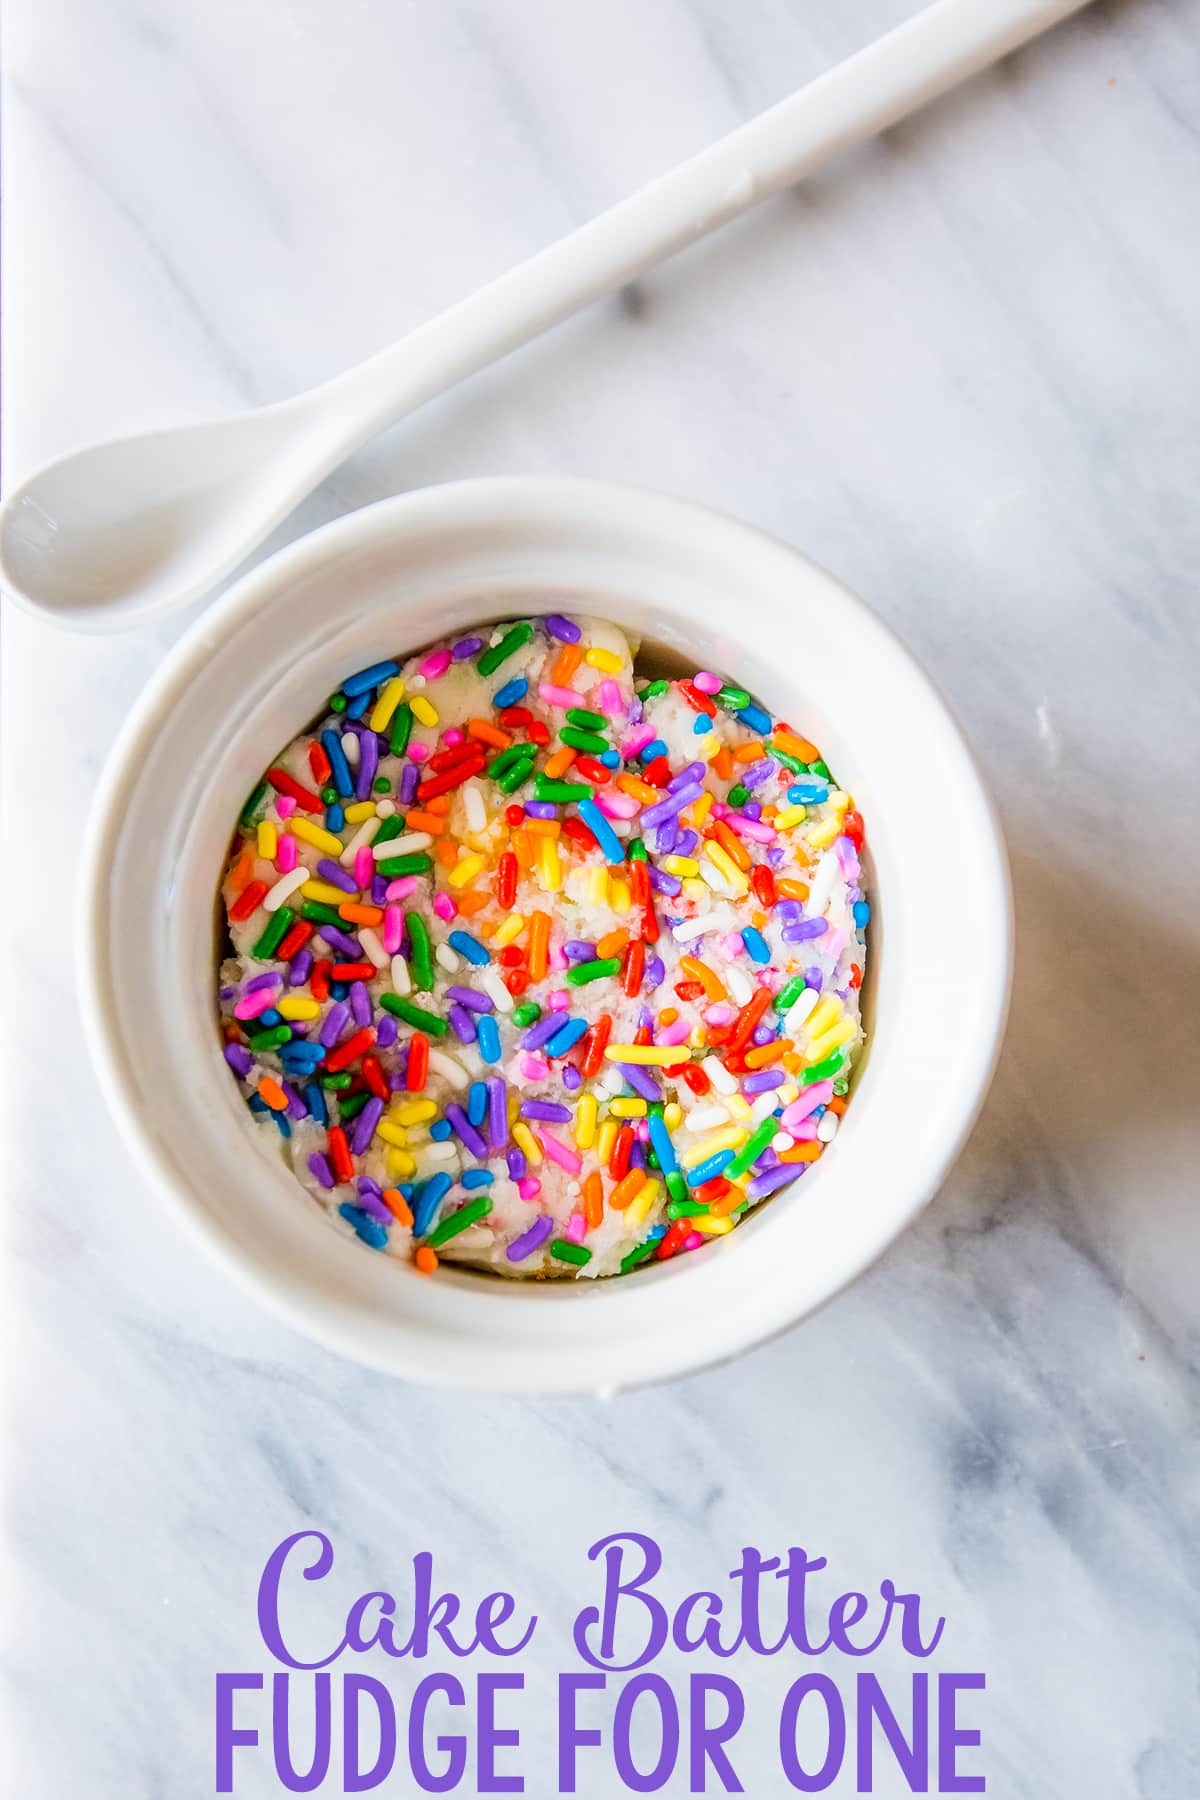 Cake batter fudge in a single serving size- this is genius!